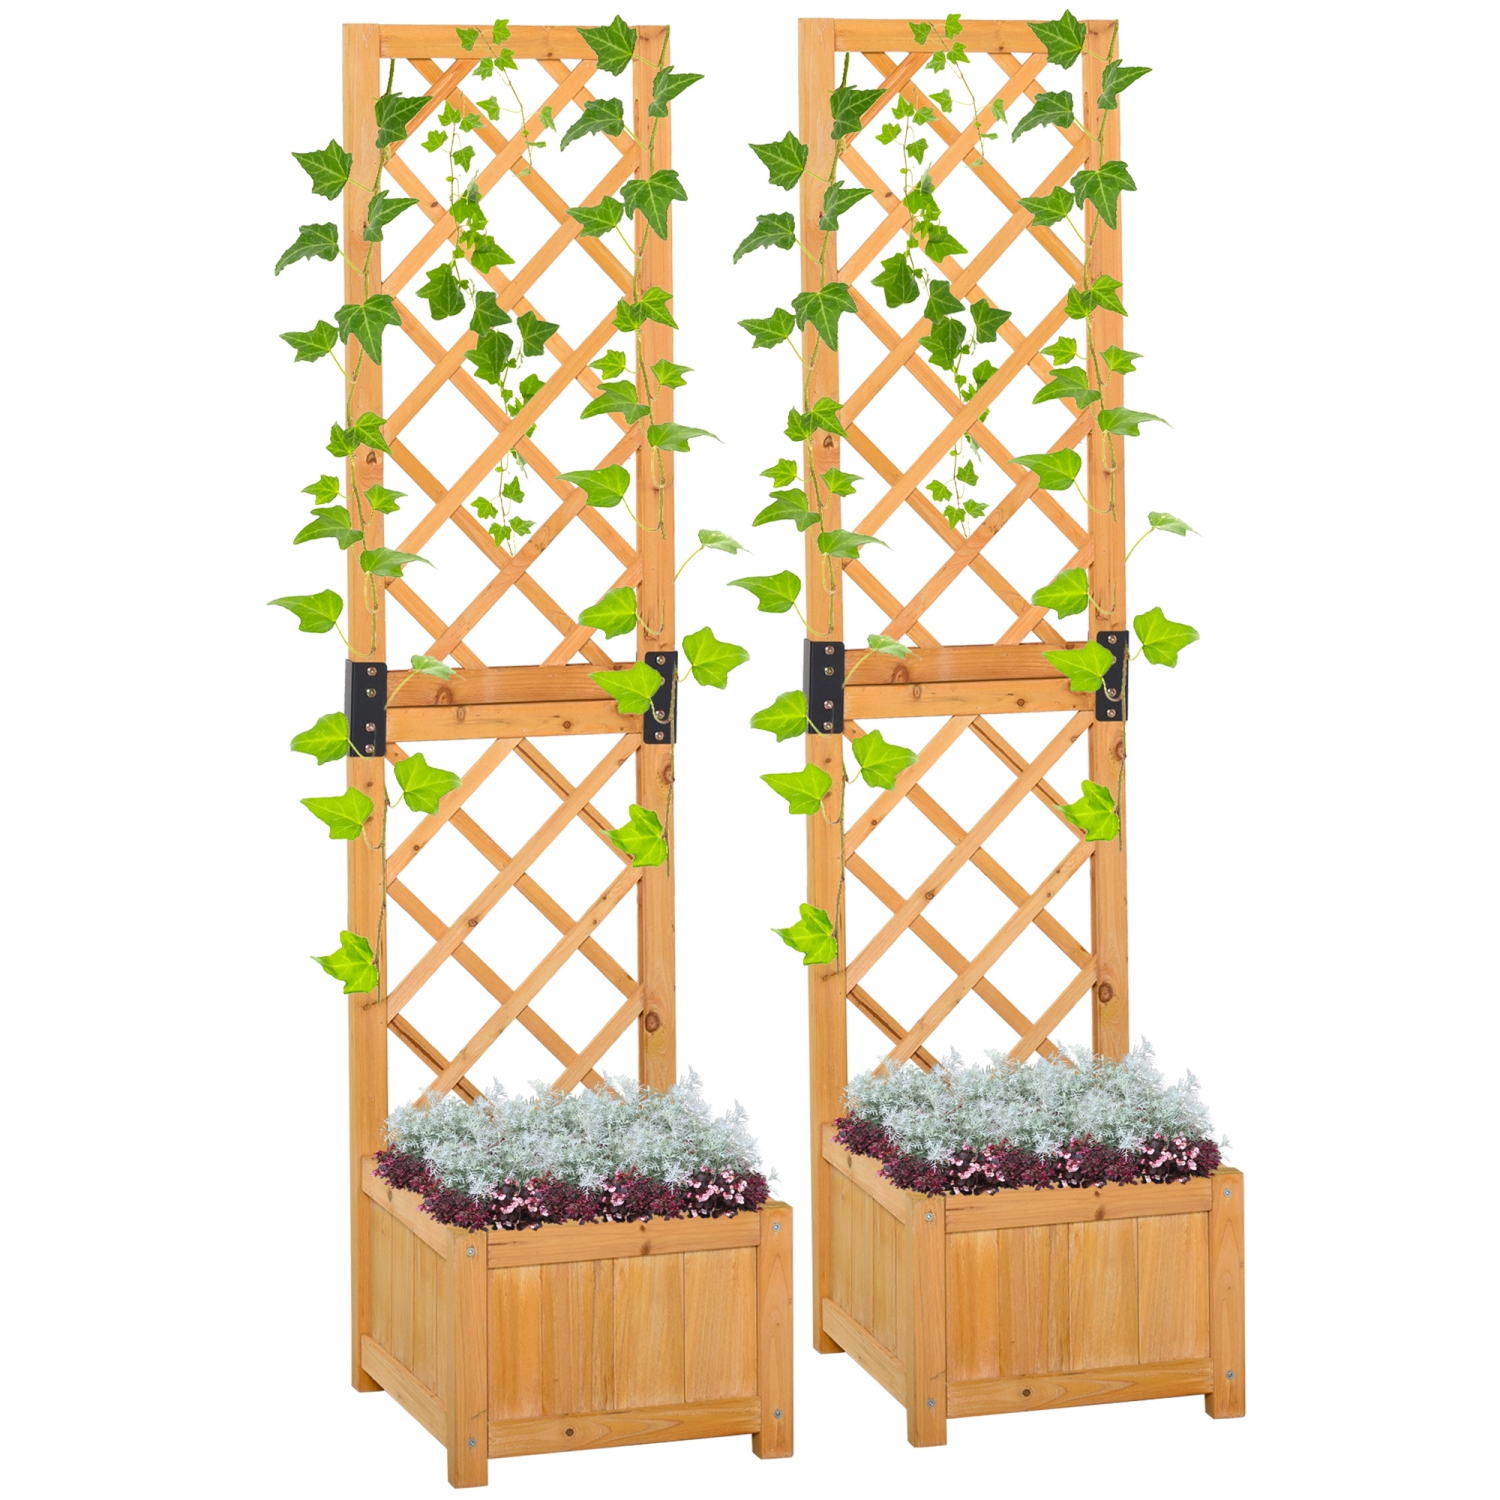 Outsunny Set of 2 Raised Garden Bed with Trellis Board Flower Stand Lattice Panels for Plants, Flowers or Vine Outdoor Indoor, Orange